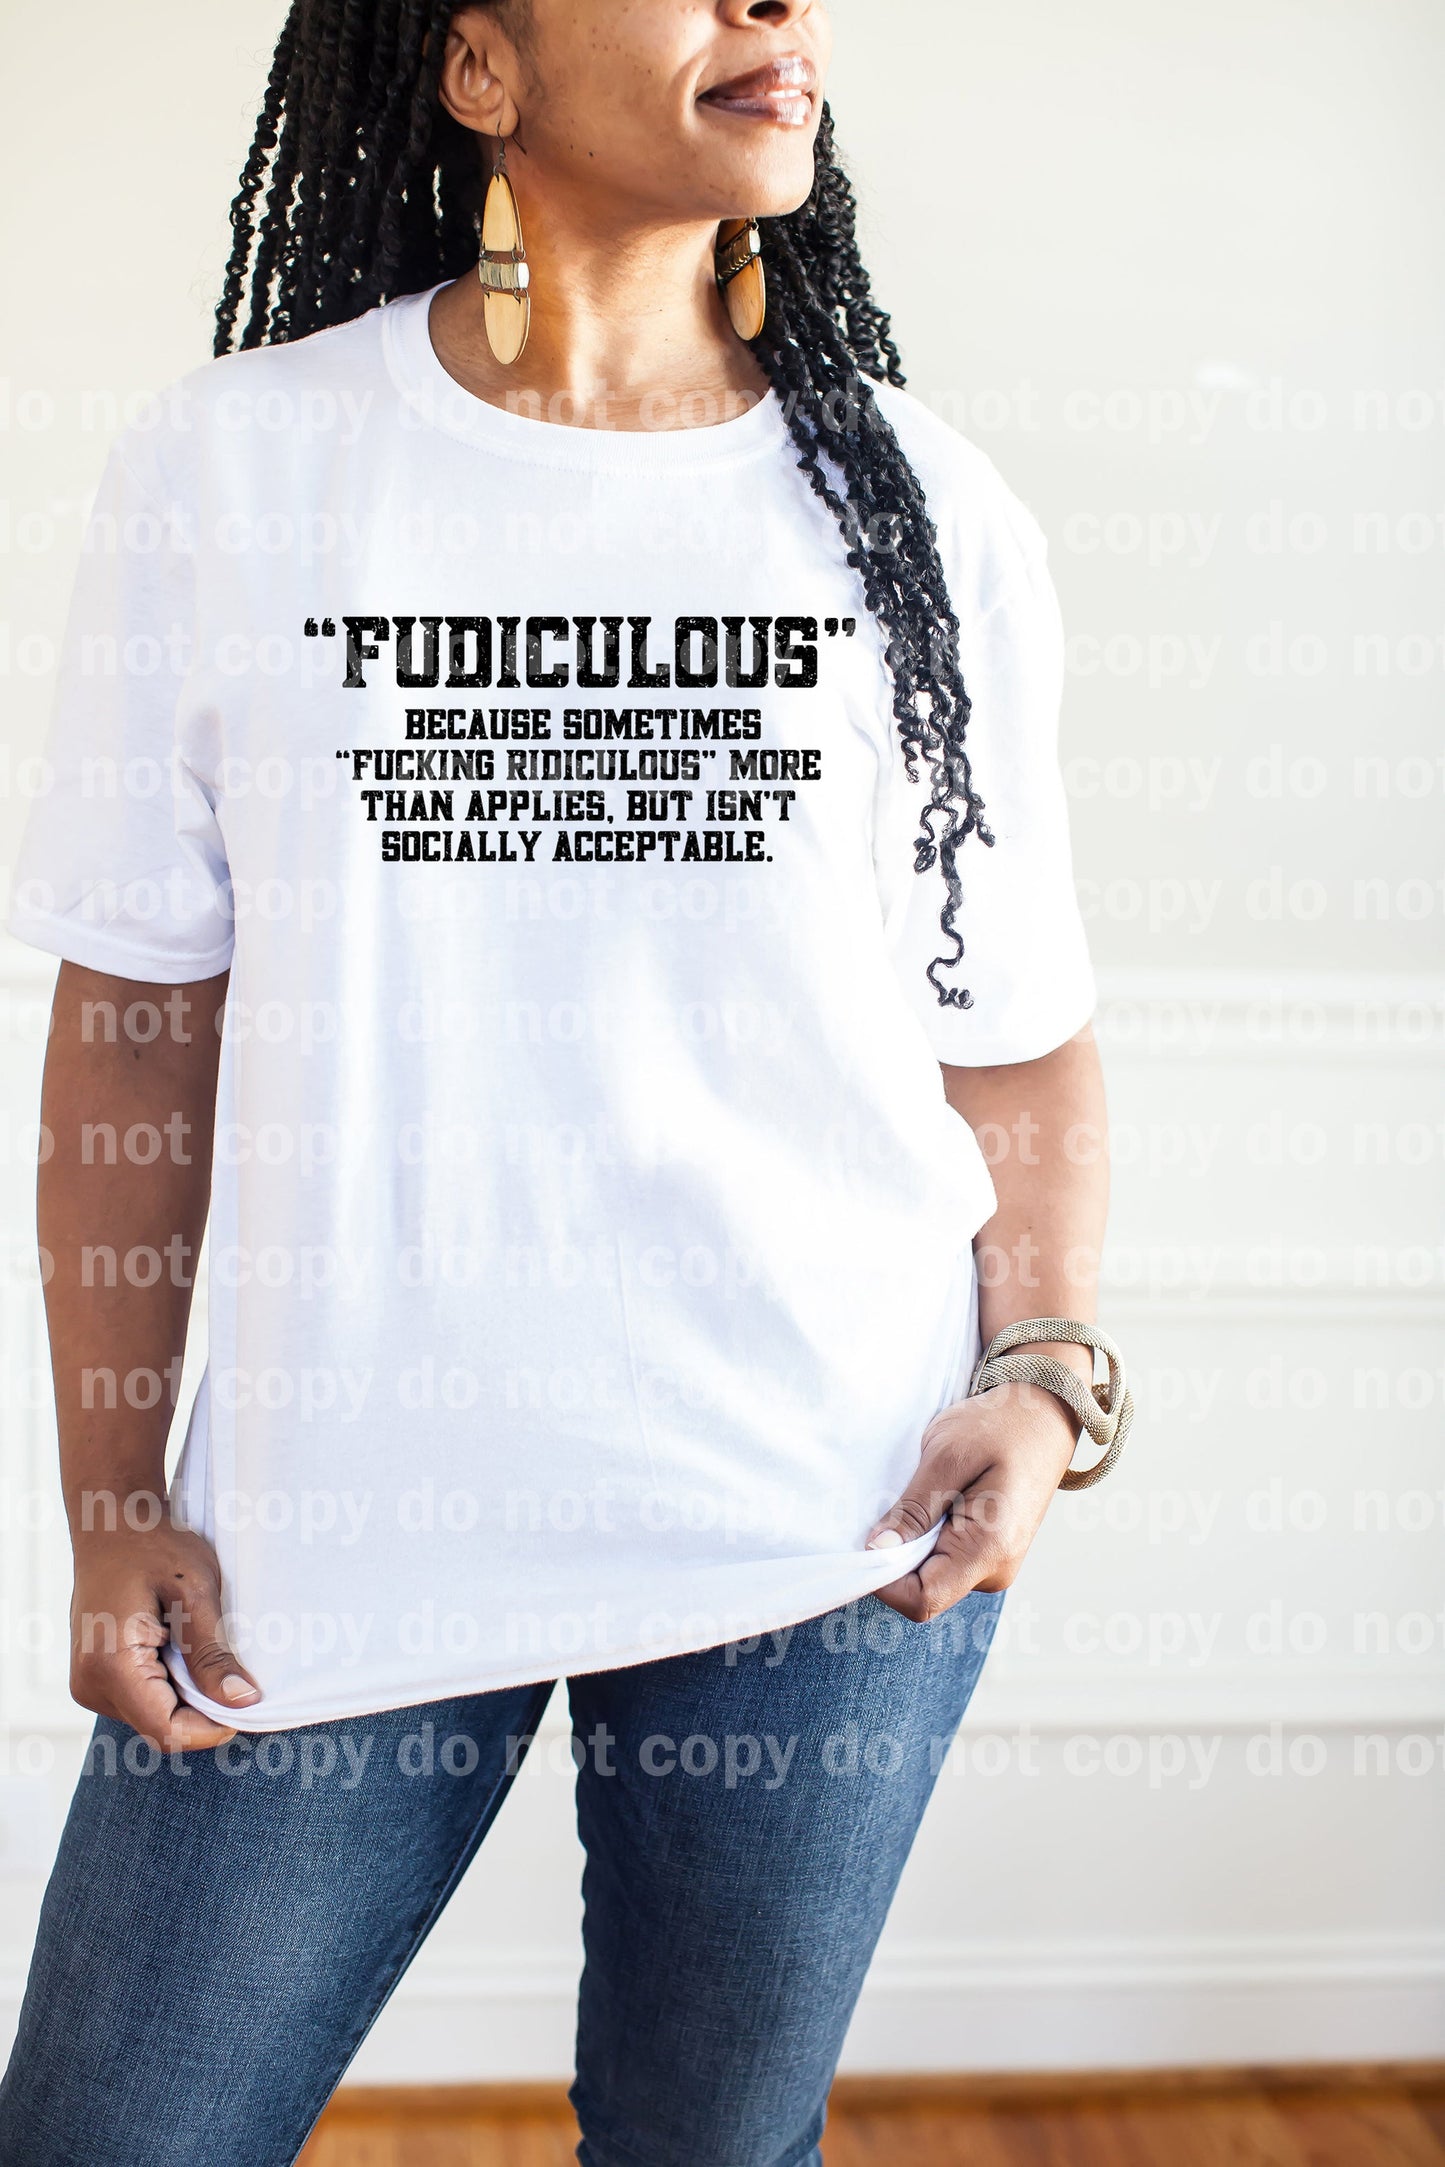 Fudiculous Because Sometimes Fucking Ridiculous More Than Applies But Isn't Socially Acceptable Dream Print or Sublimation Print